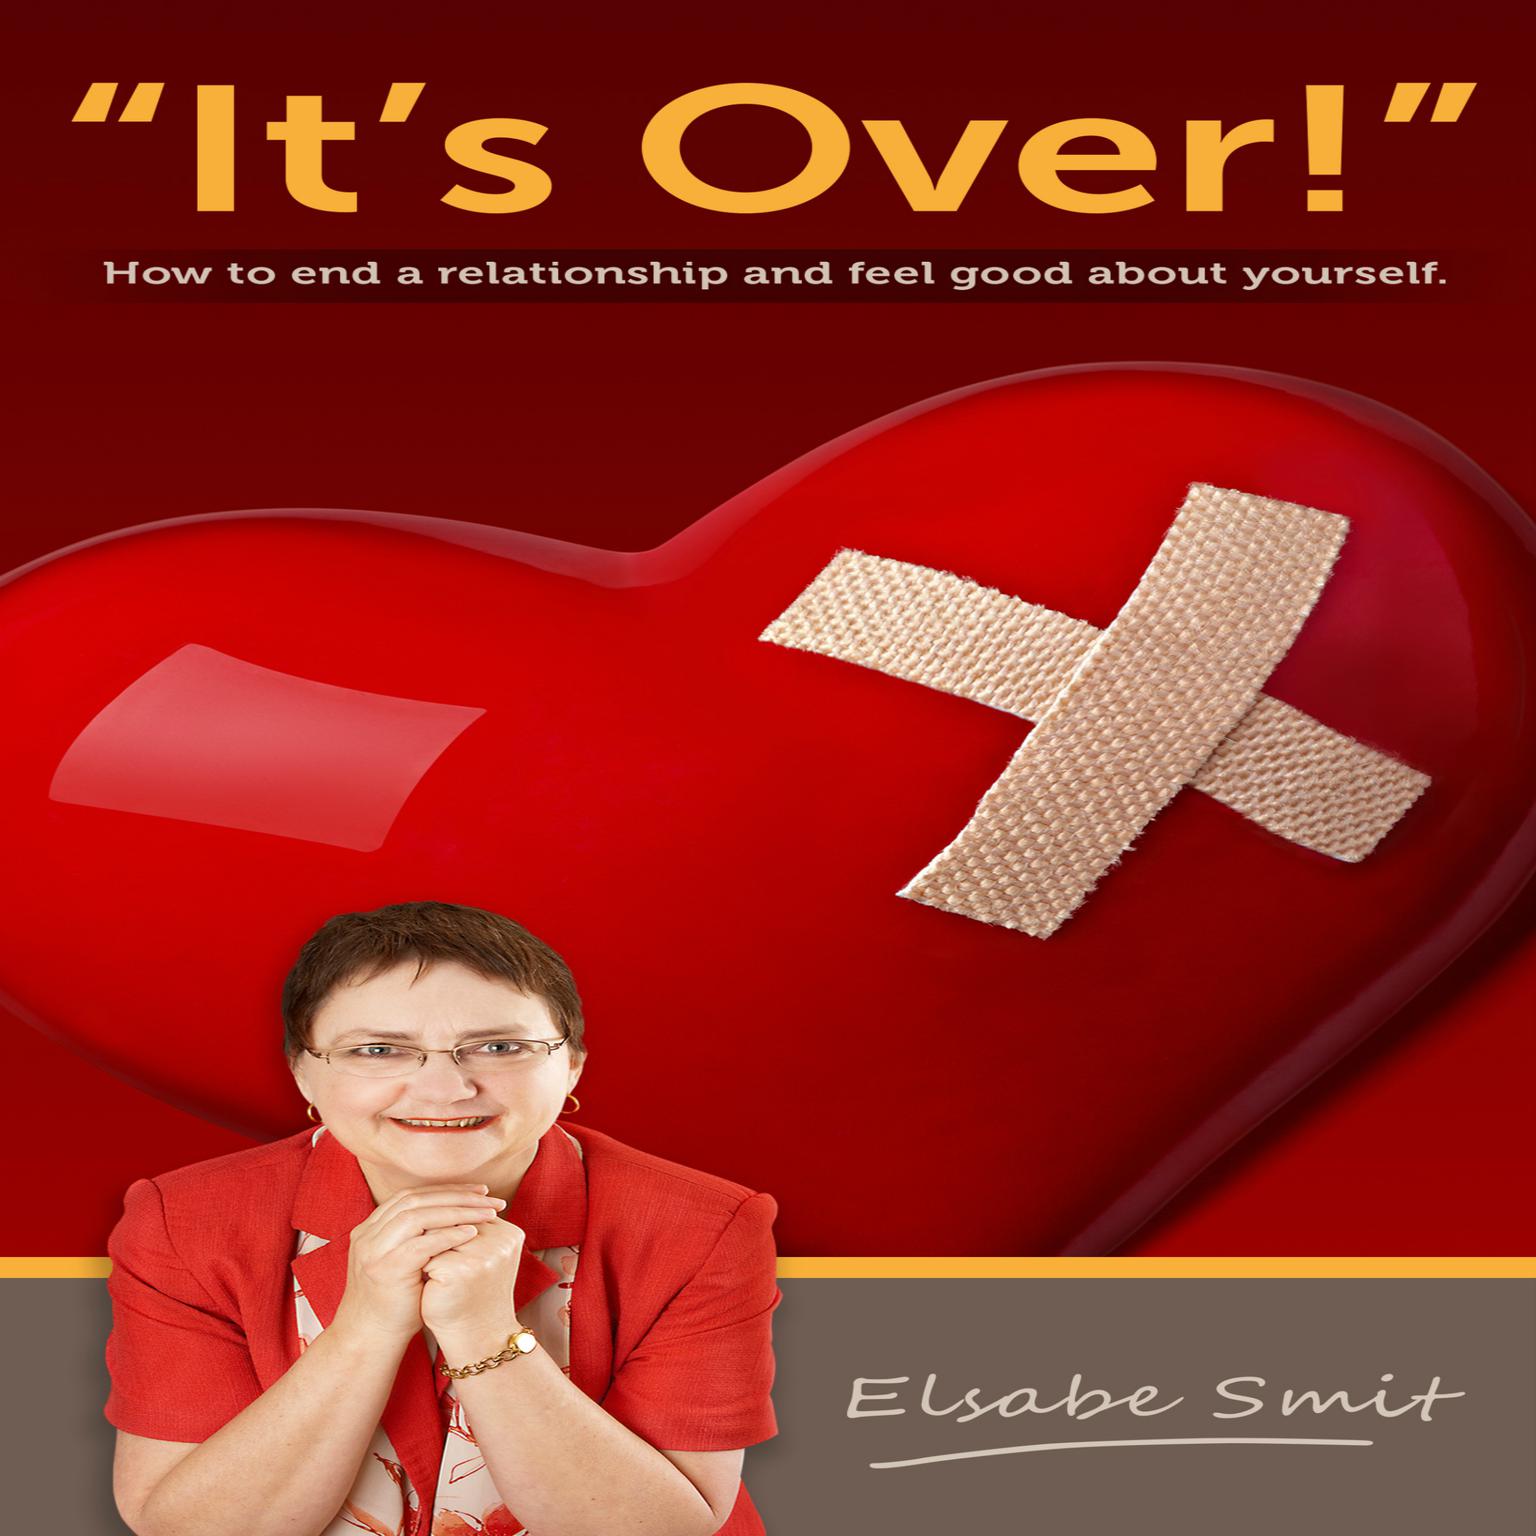 Its Over.  How to End a Relationship and Feel Good About Yourself: How to End a Relationship and Feel Good About Yourself Audiobook, by Elsabe Smit